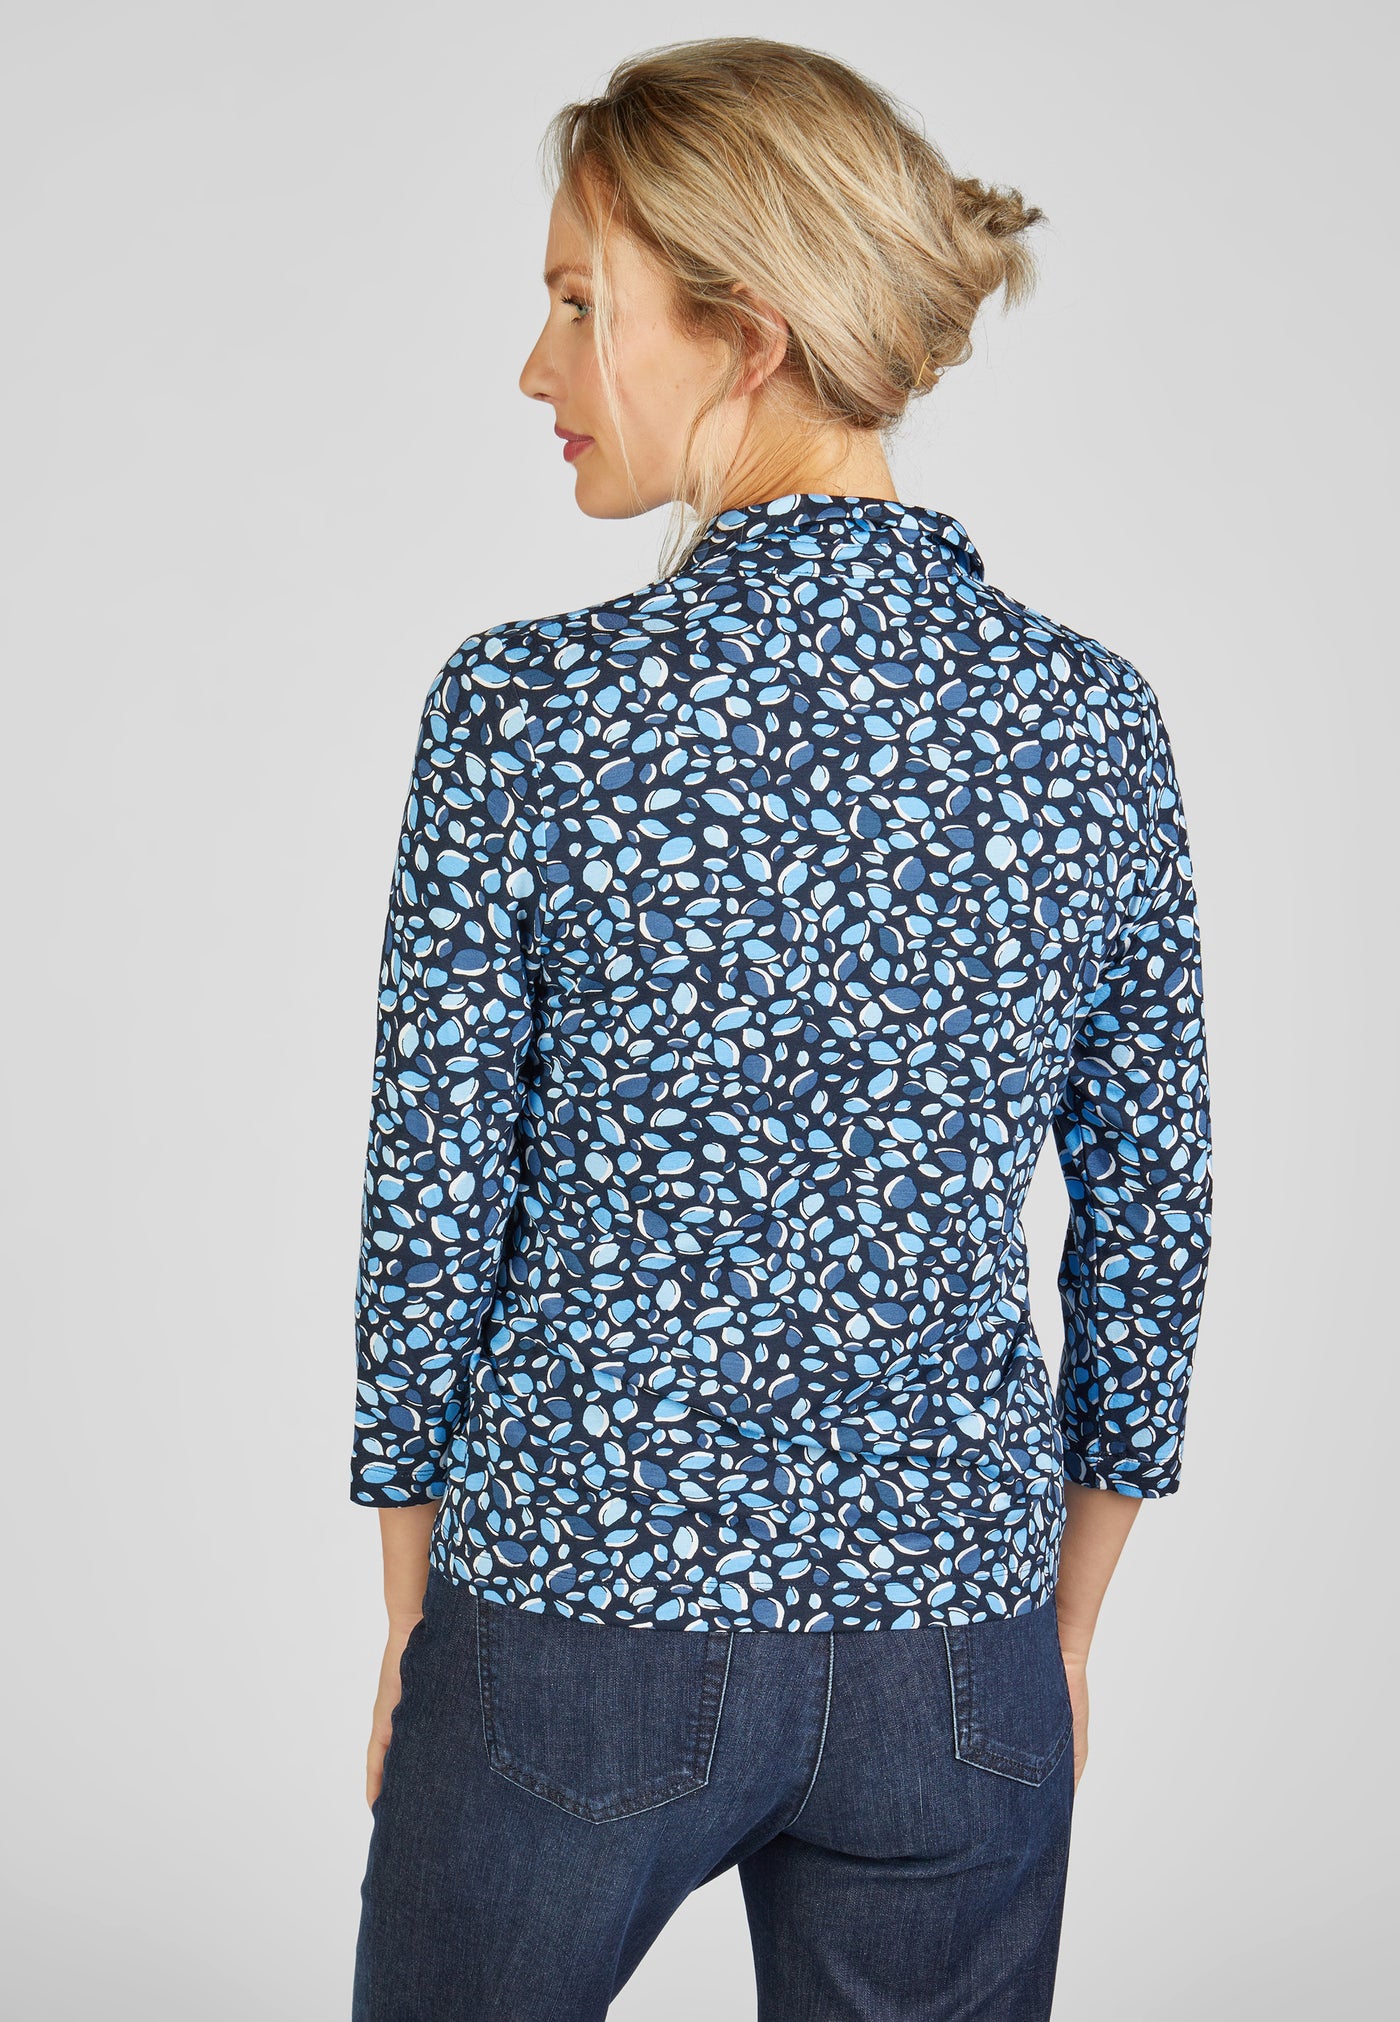 Navy, Blue & White Spot Print Top with Collar and Buttons